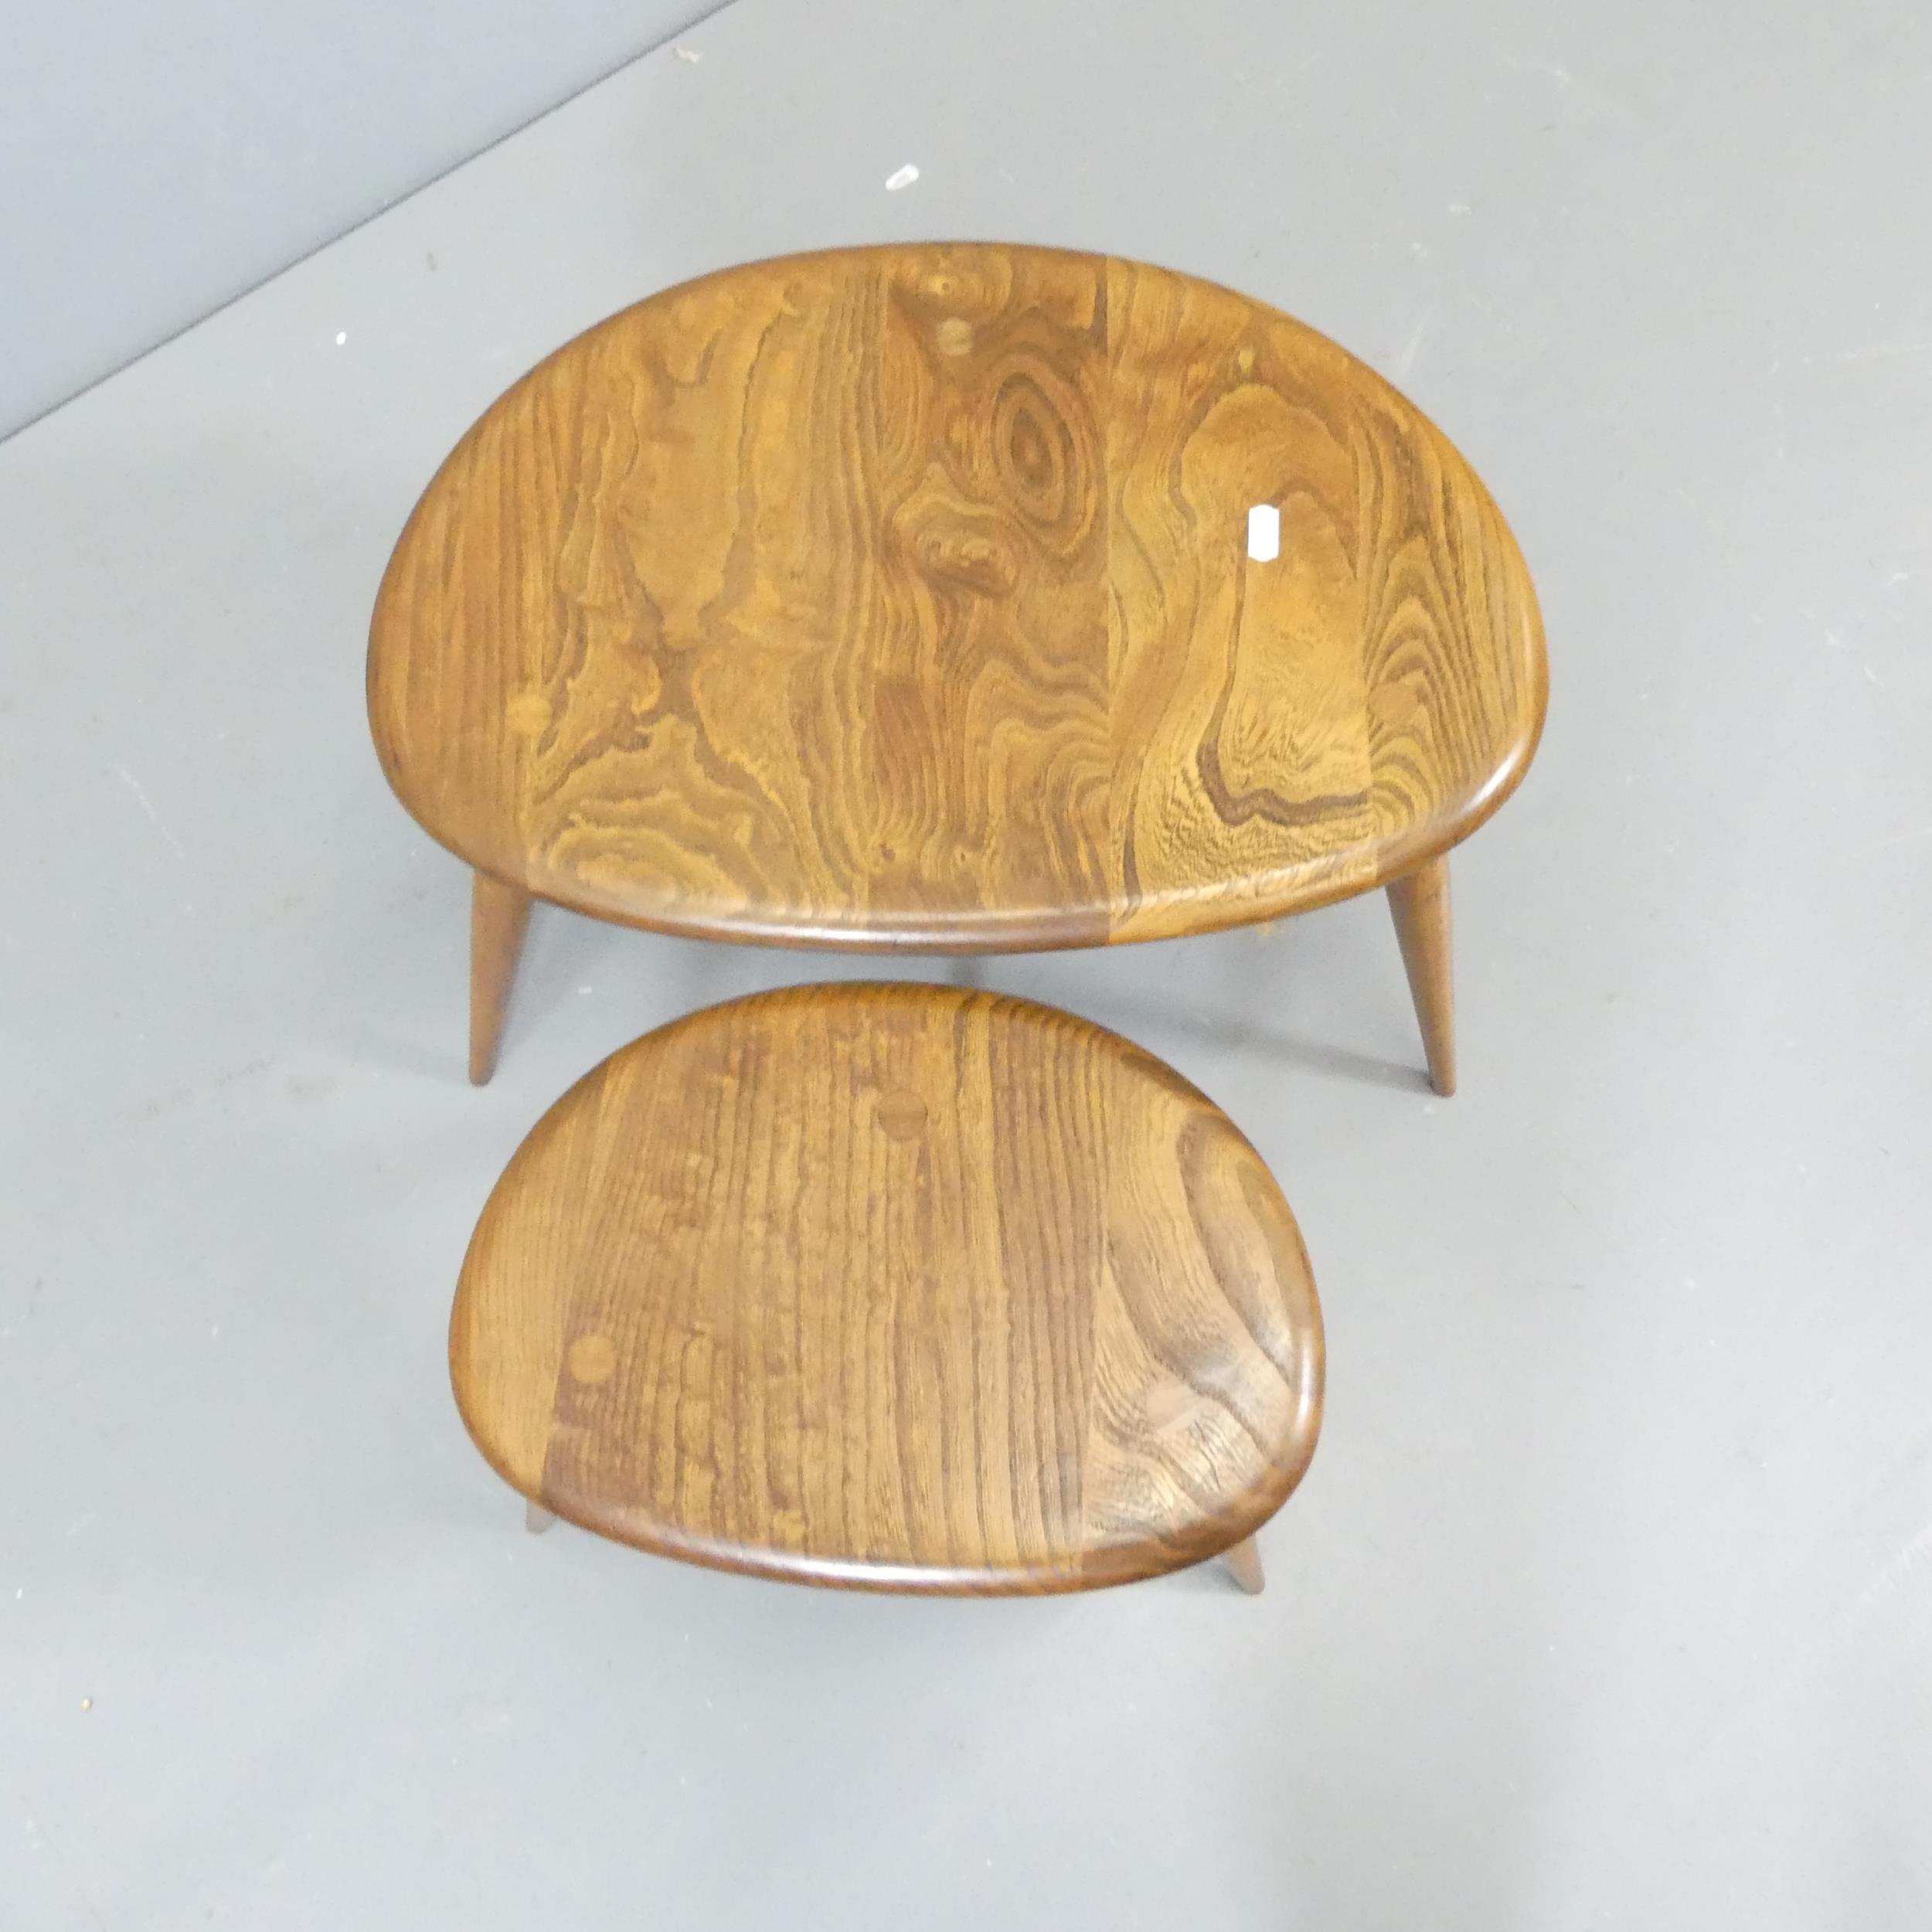 ERCOL - 2 nesting pebble tables. Largest - 50x36x34cm. These are likely tables 2 and 3, missing - Image 2 of 2